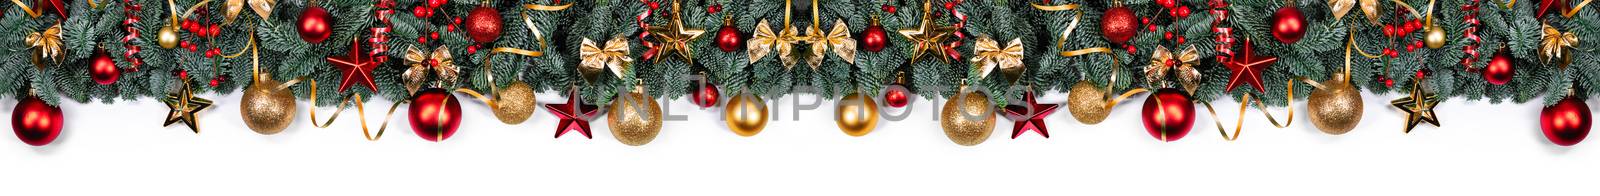 Christmas border frame design copmosition of noble fir tree branch and red golden decorations baubles isolated on white background